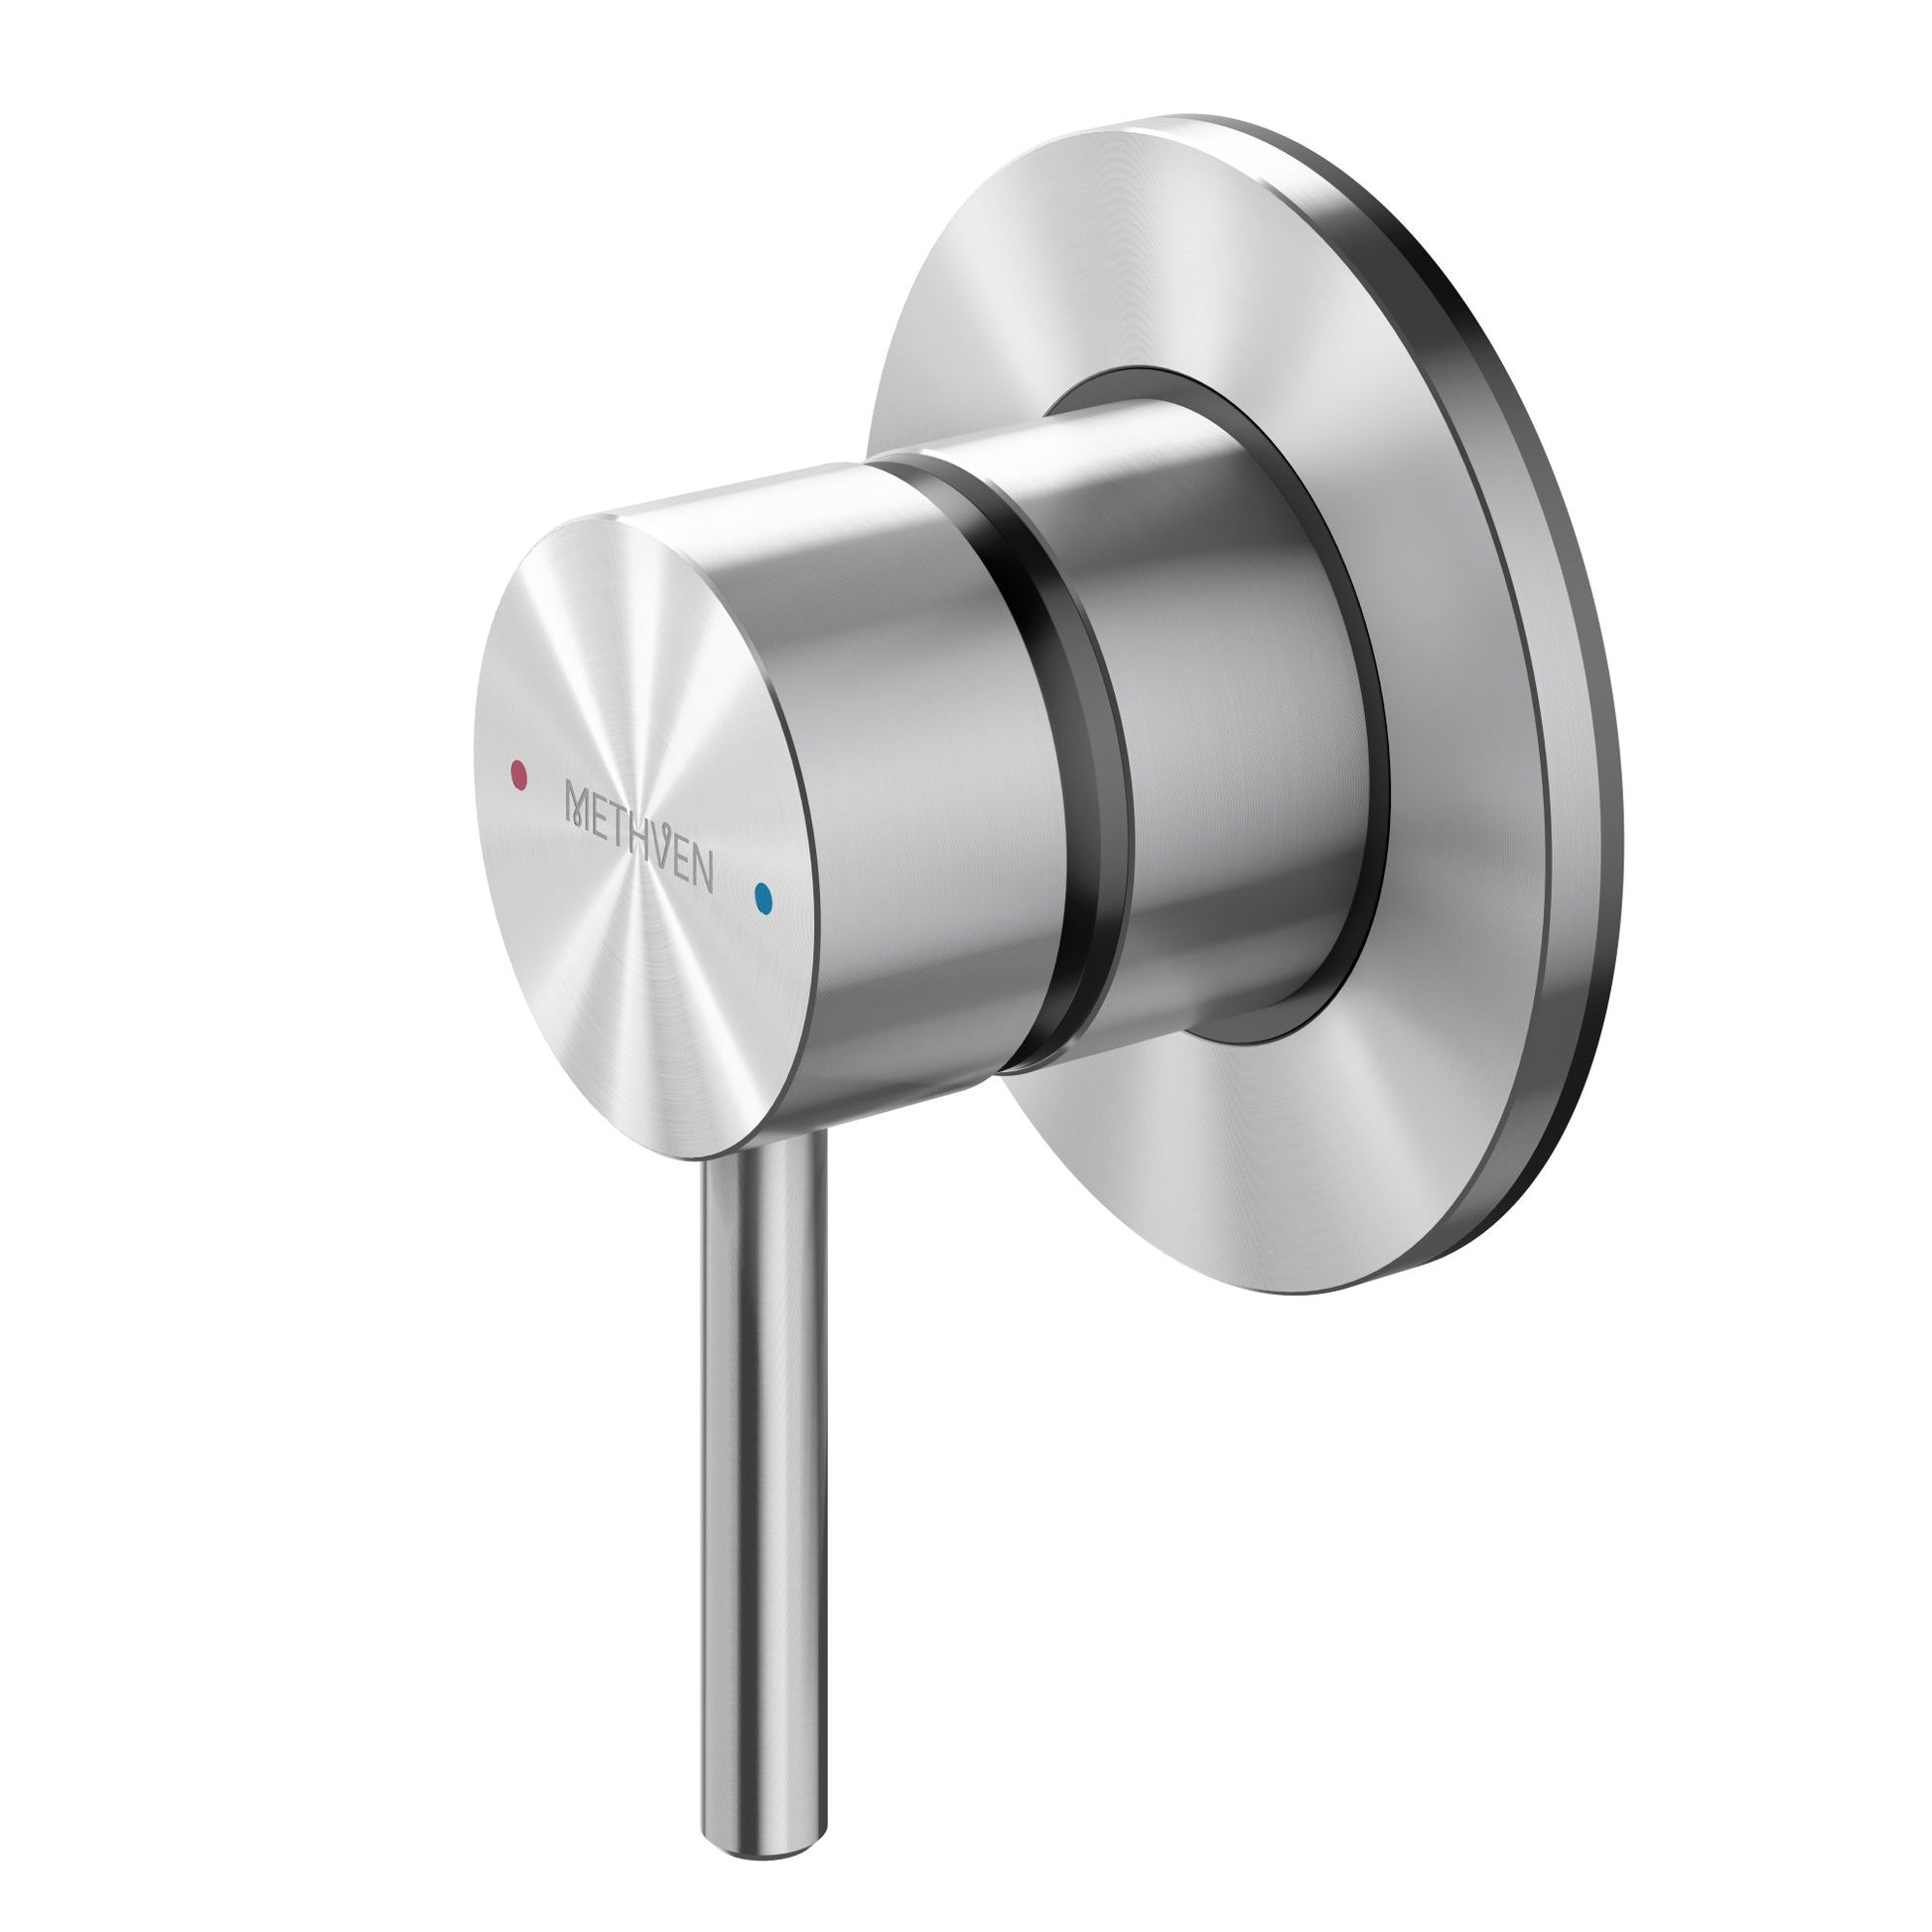 Methven Turoa Shower Mixer in Stainless Steel TUHPSSS for spa like bathrooms